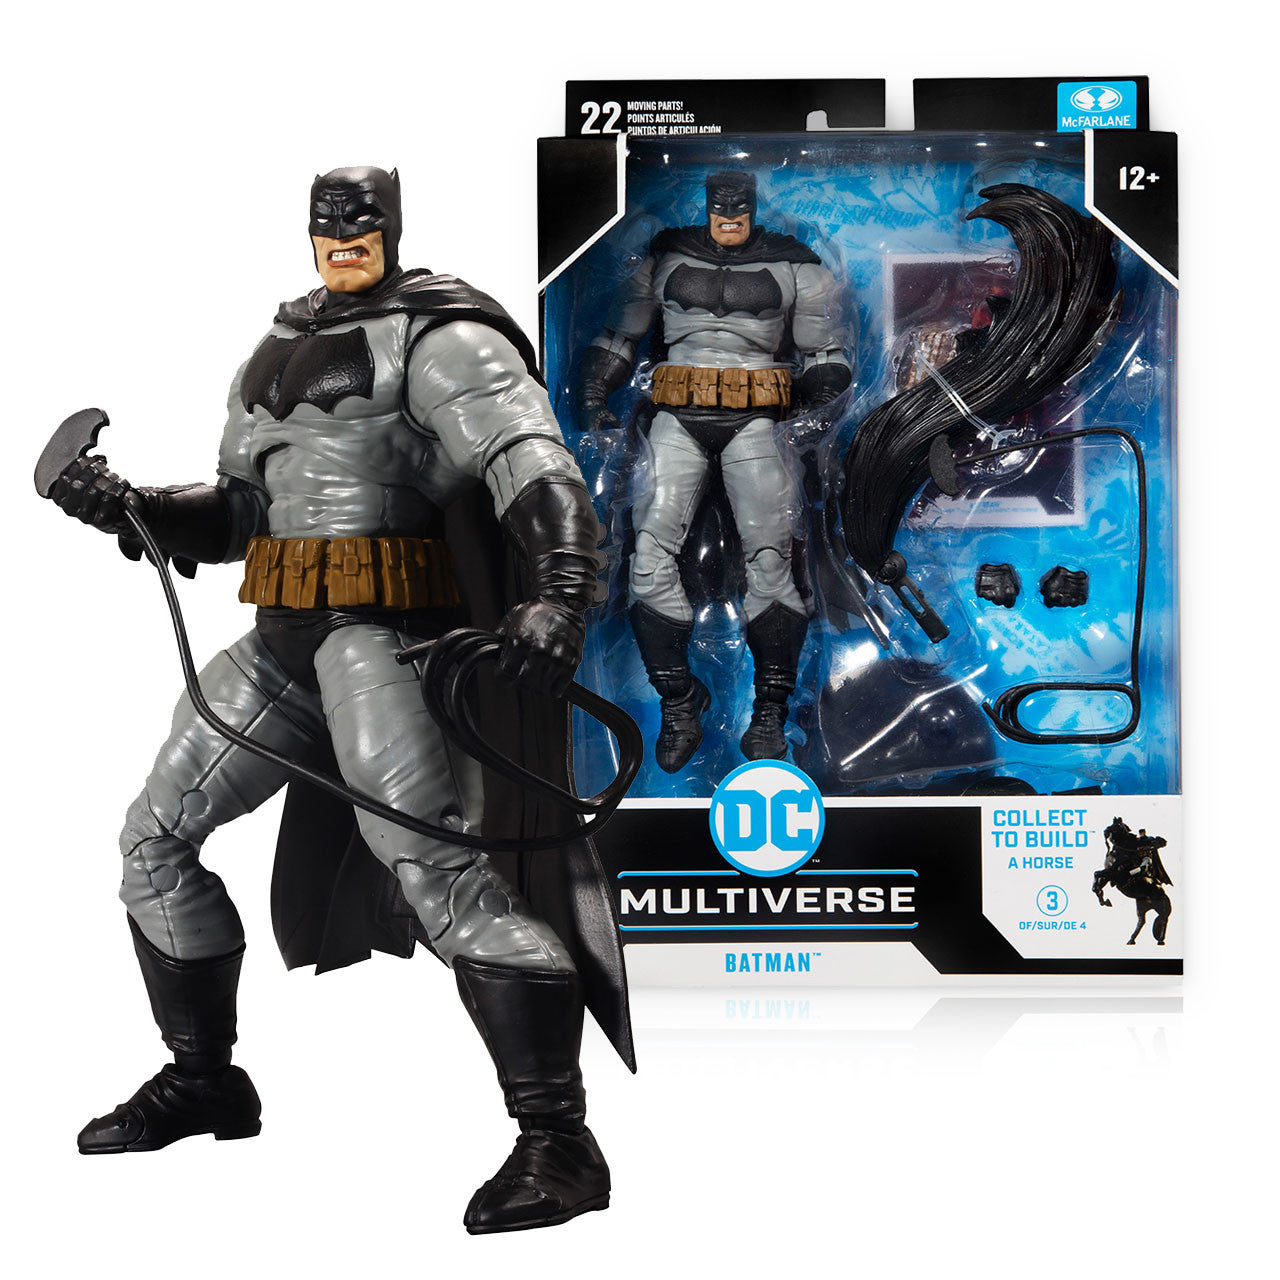 DC Multiverse Set of 4: The Dark Knight Returns Build A Fig: Horse Set